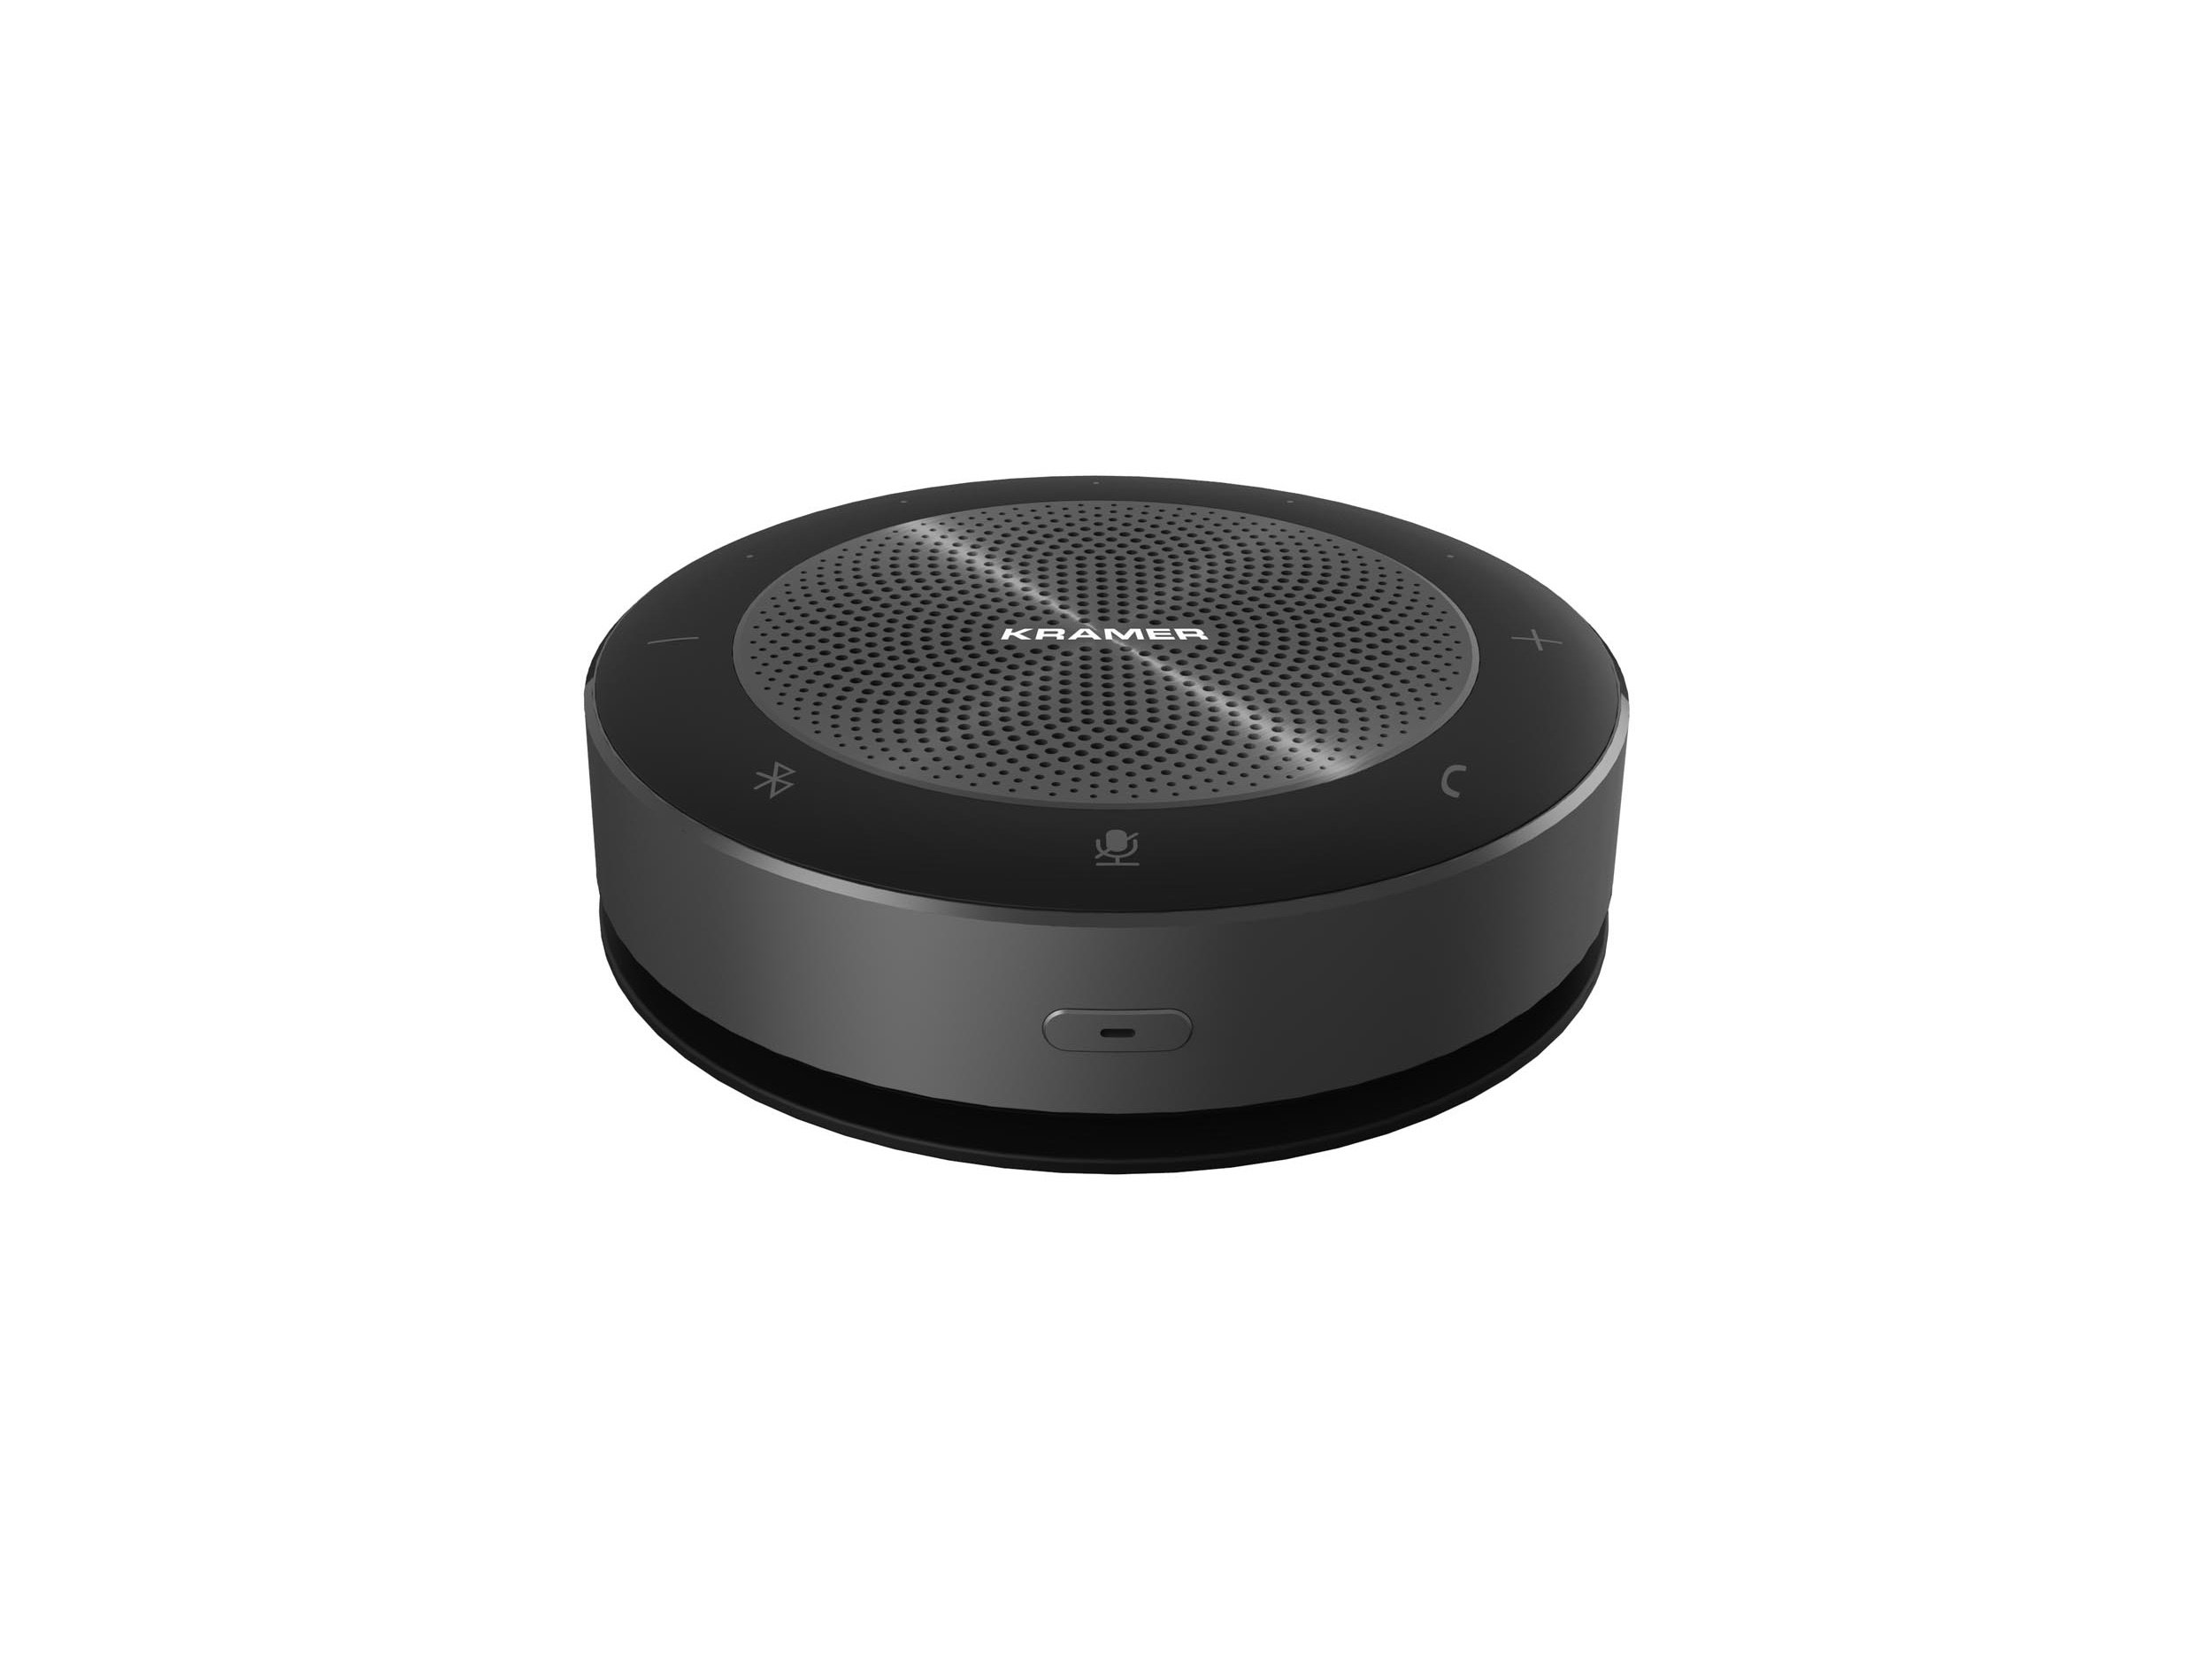 K-SPEAK Omni-directional Speaker Phone/6 Microphone Array/Bluetooth/USB/Aux Connectivity and Wireless Charging by Kramer